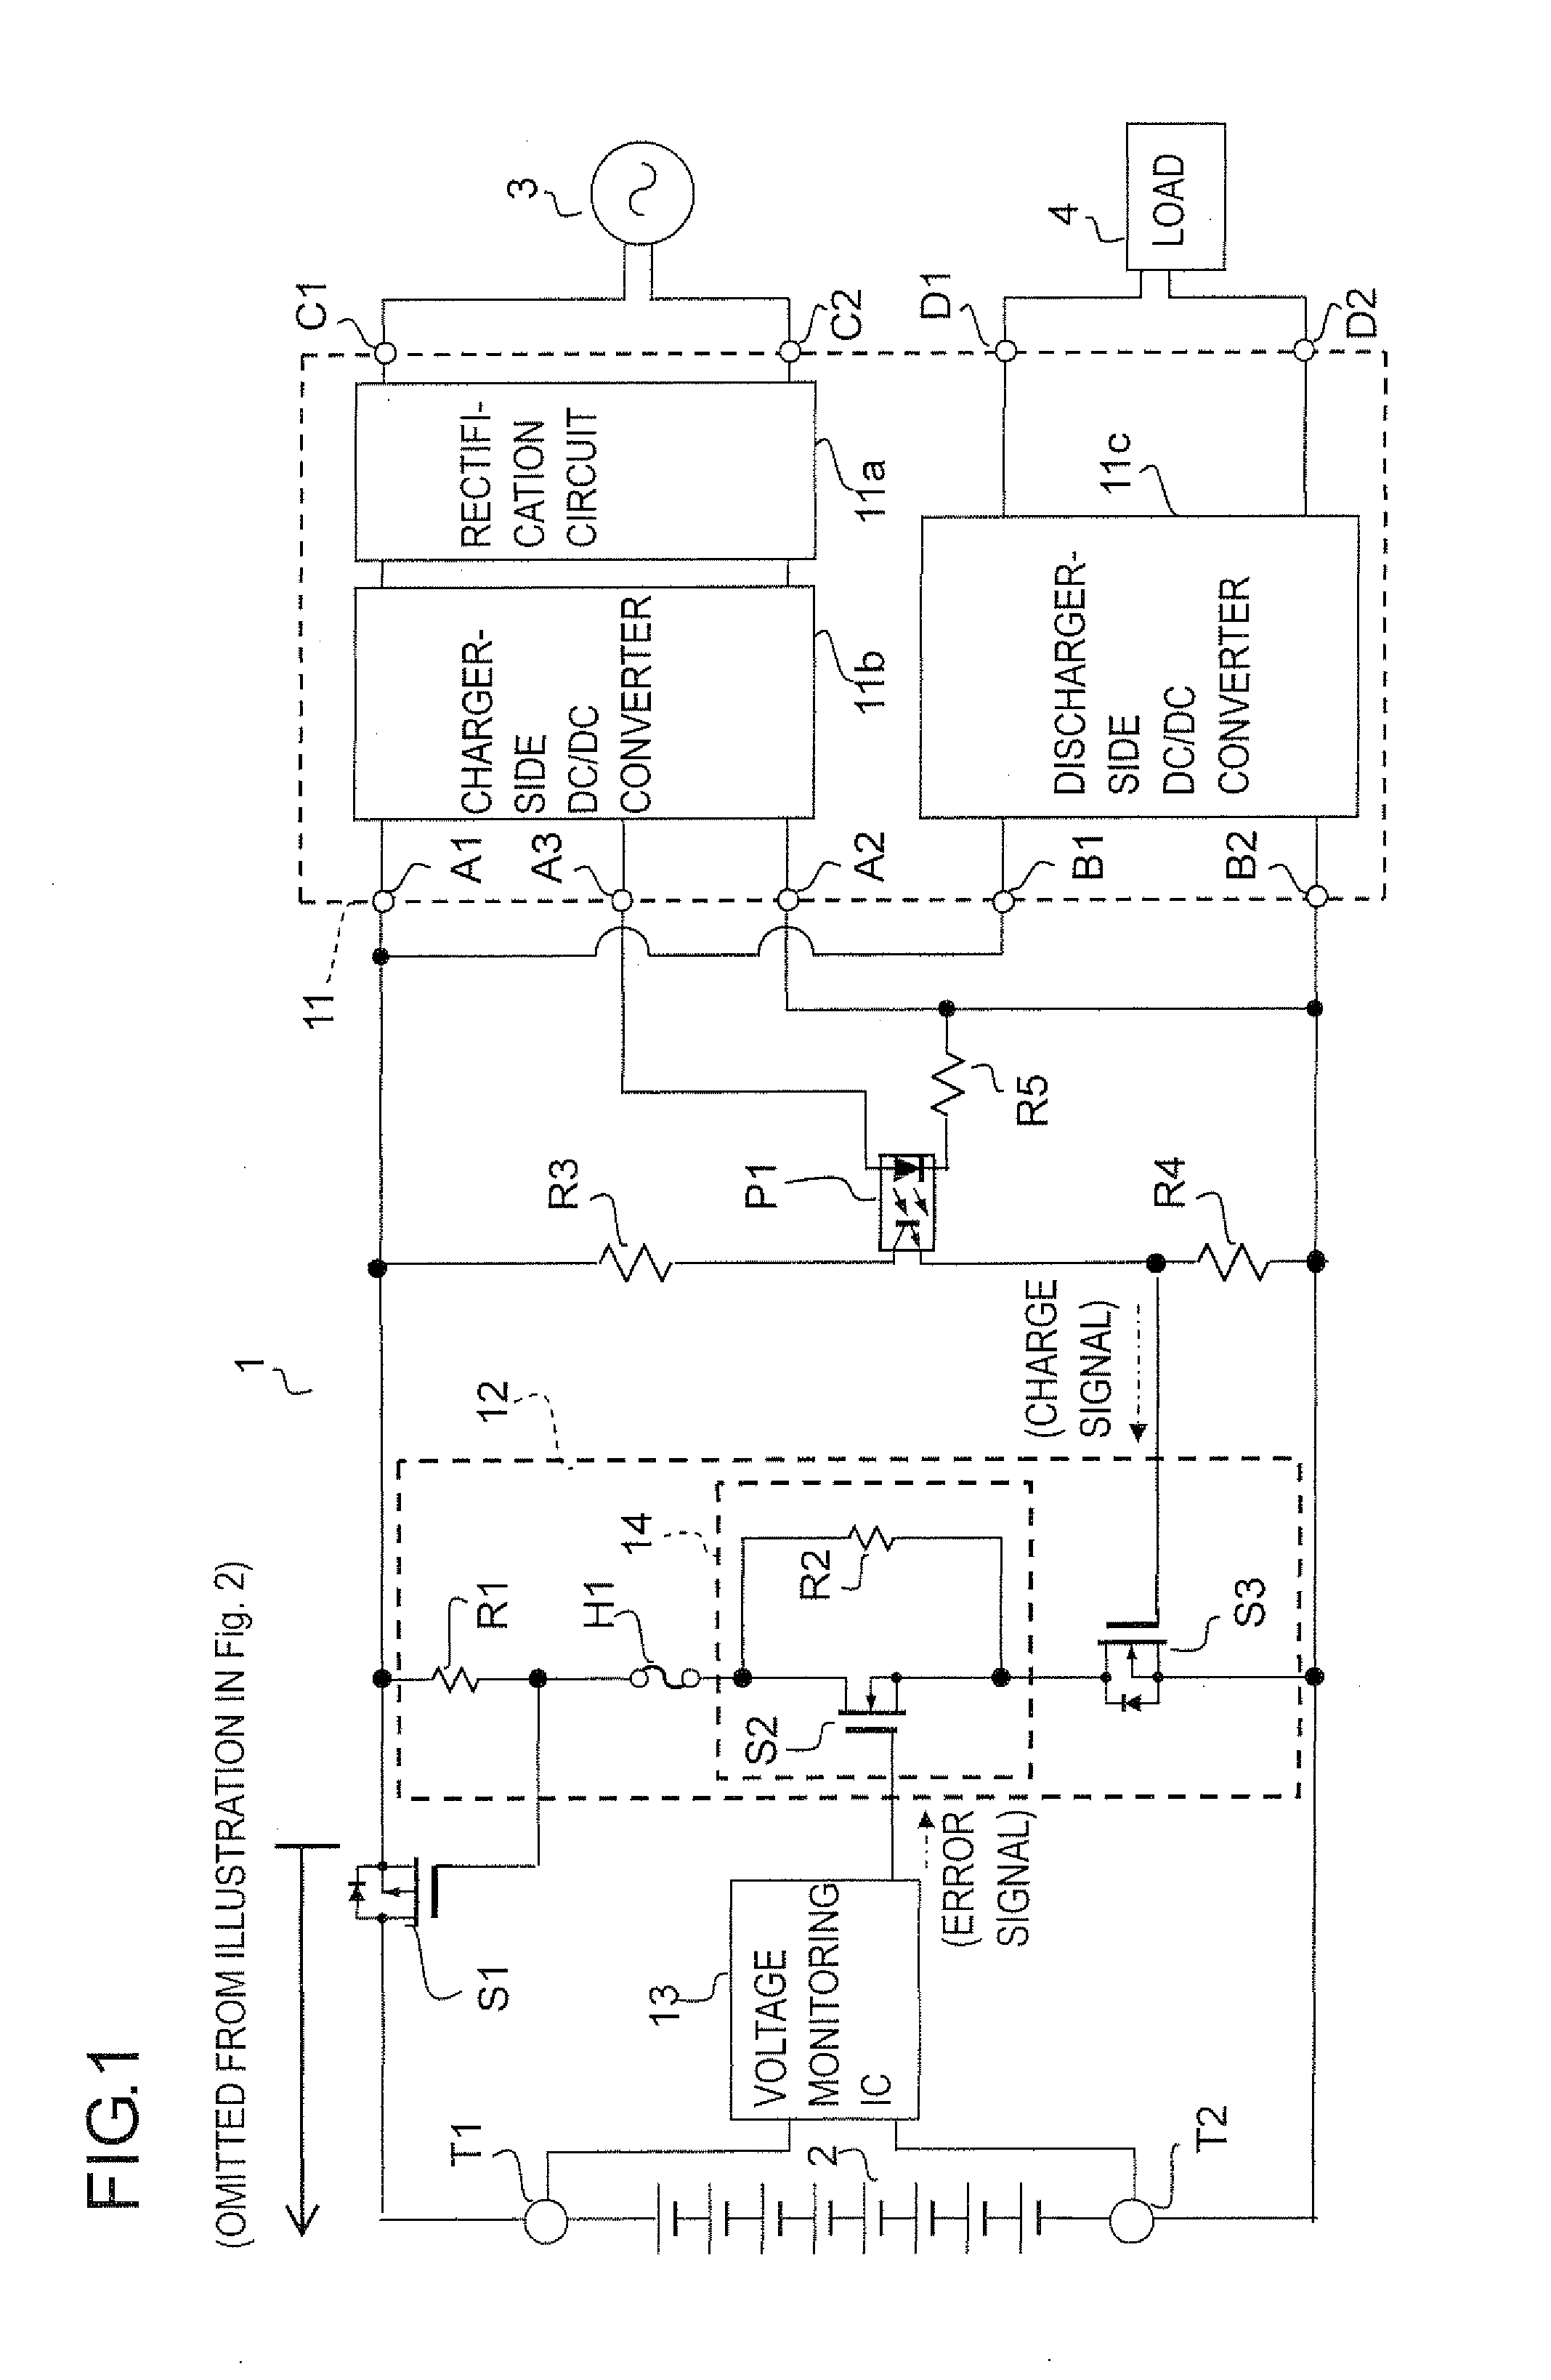 Secondary battery protection circuit